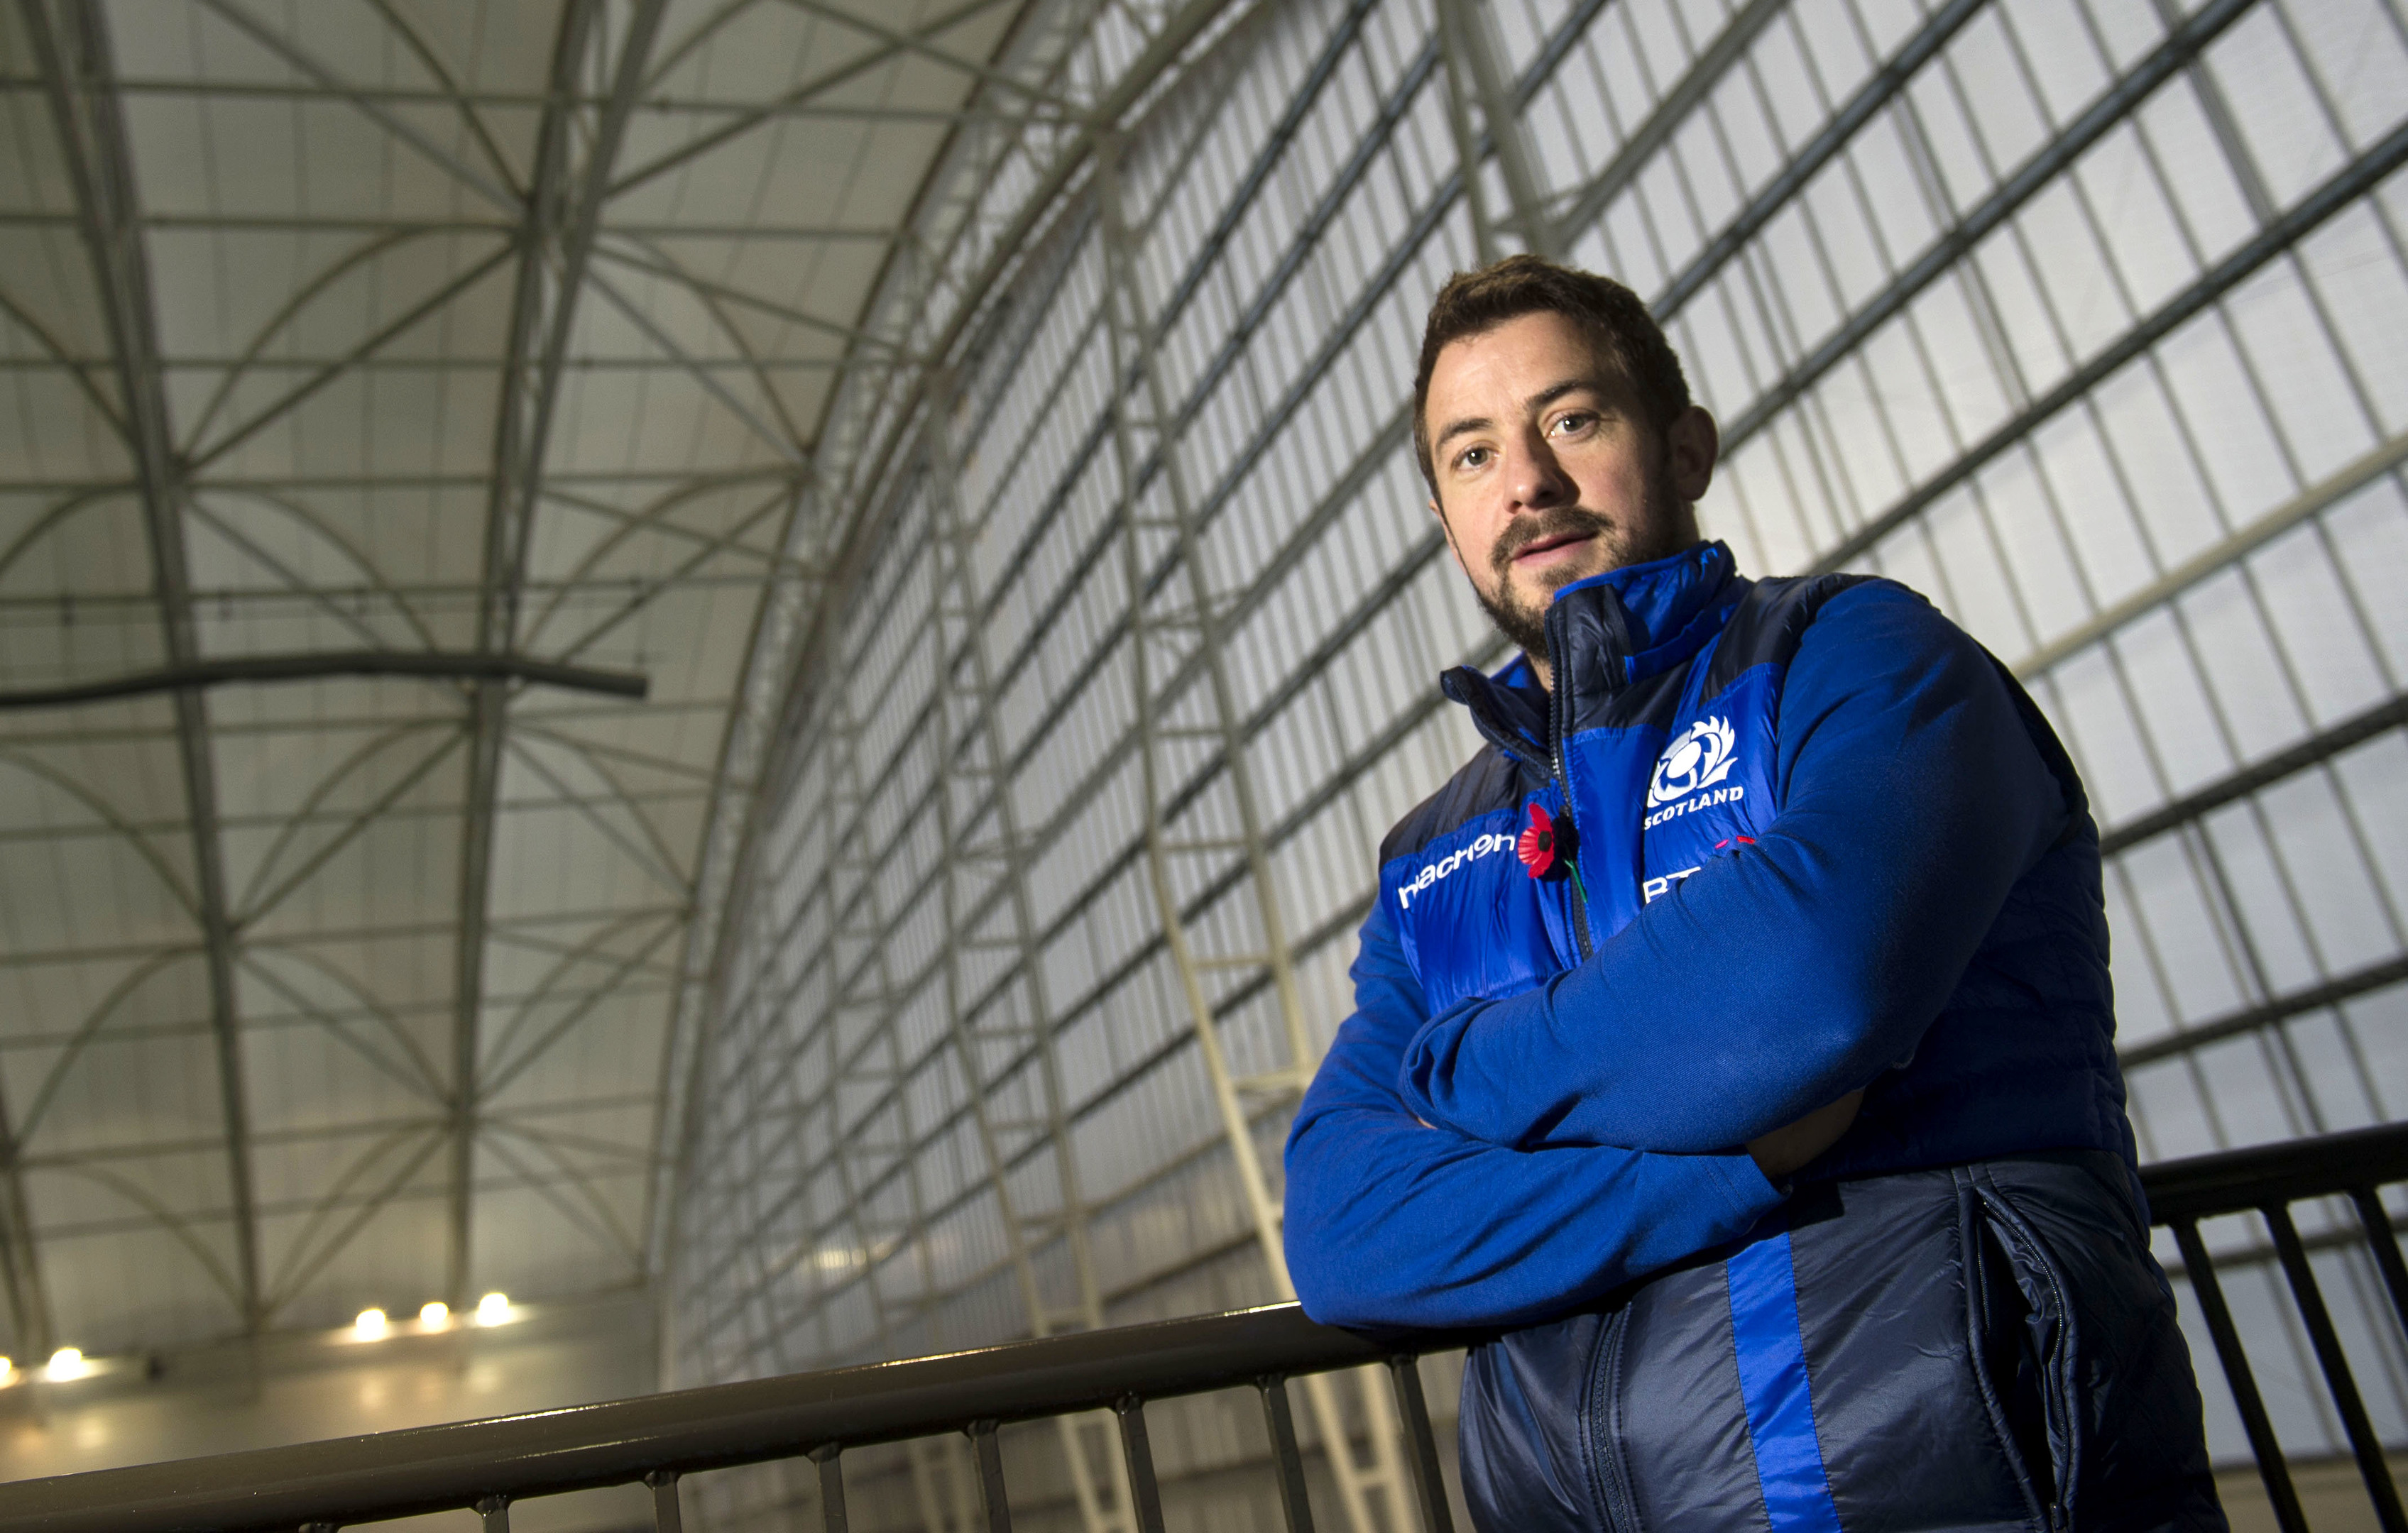 Scotland captain Greig Laidlaw at the national team's new training base at Oriam.